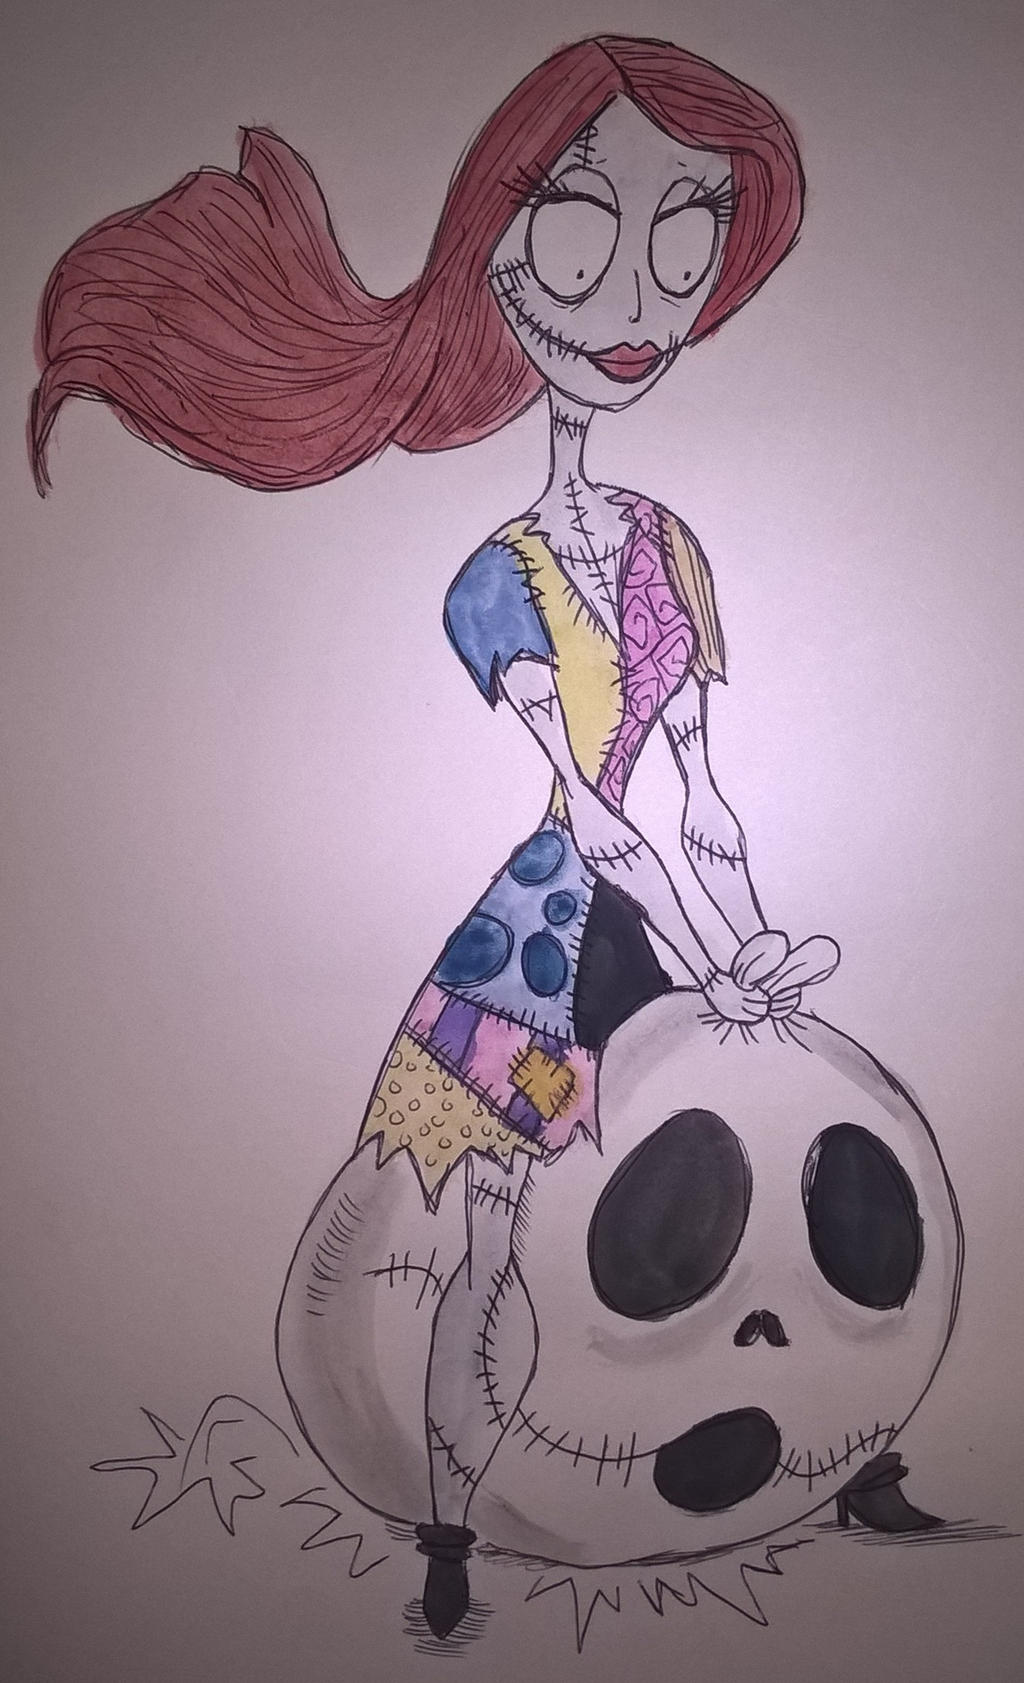 Sally on space hopper by nymeriadire on DeviantArt